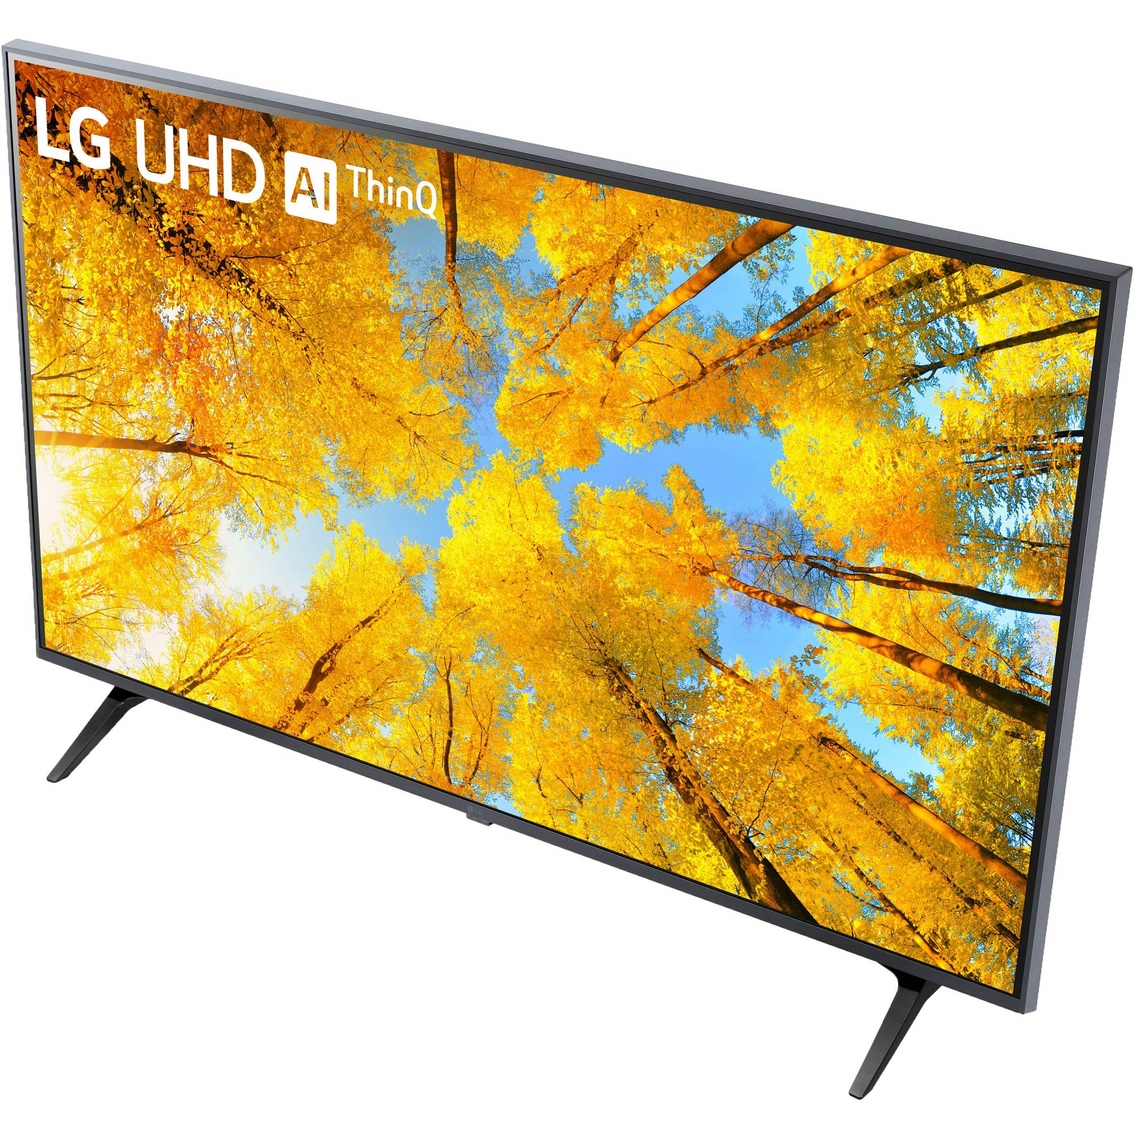 LG 43 in. 4K HDR Smart TV with AI ThinQ 43UQ7570PUB - Image 5 of 9